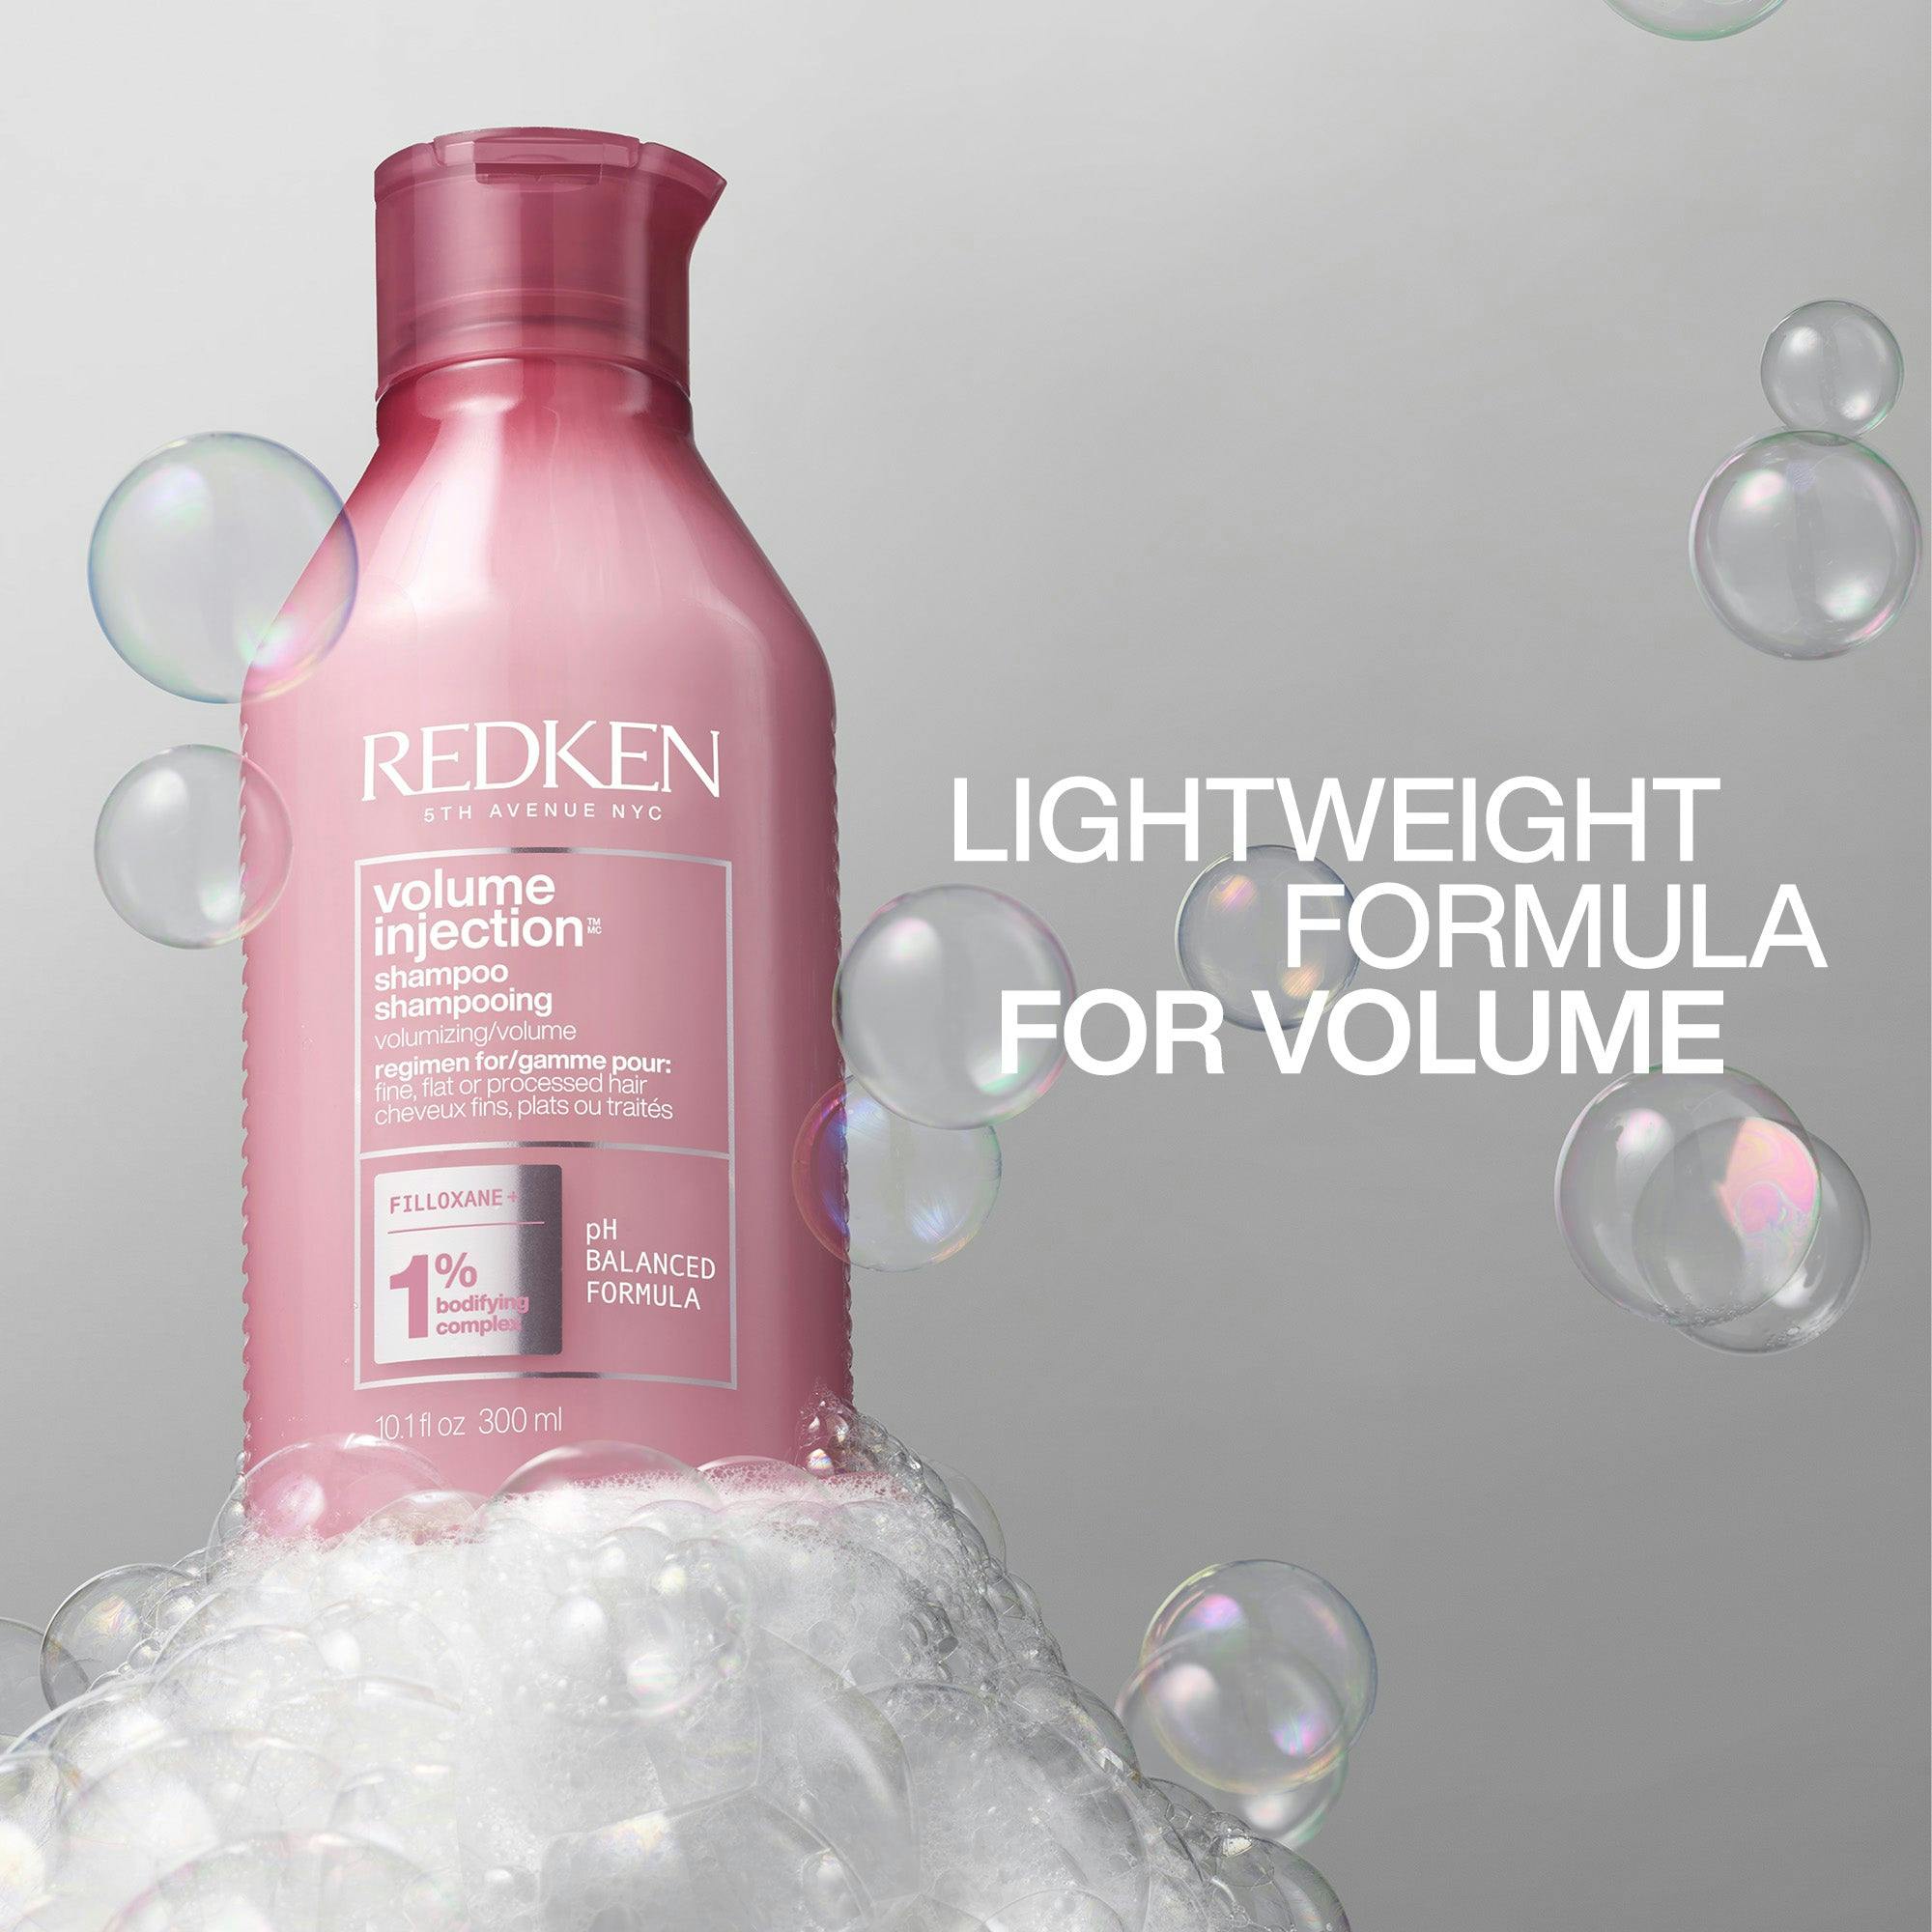 Redken Volume Injection Shampoo and Conditioner 500ml Bundle